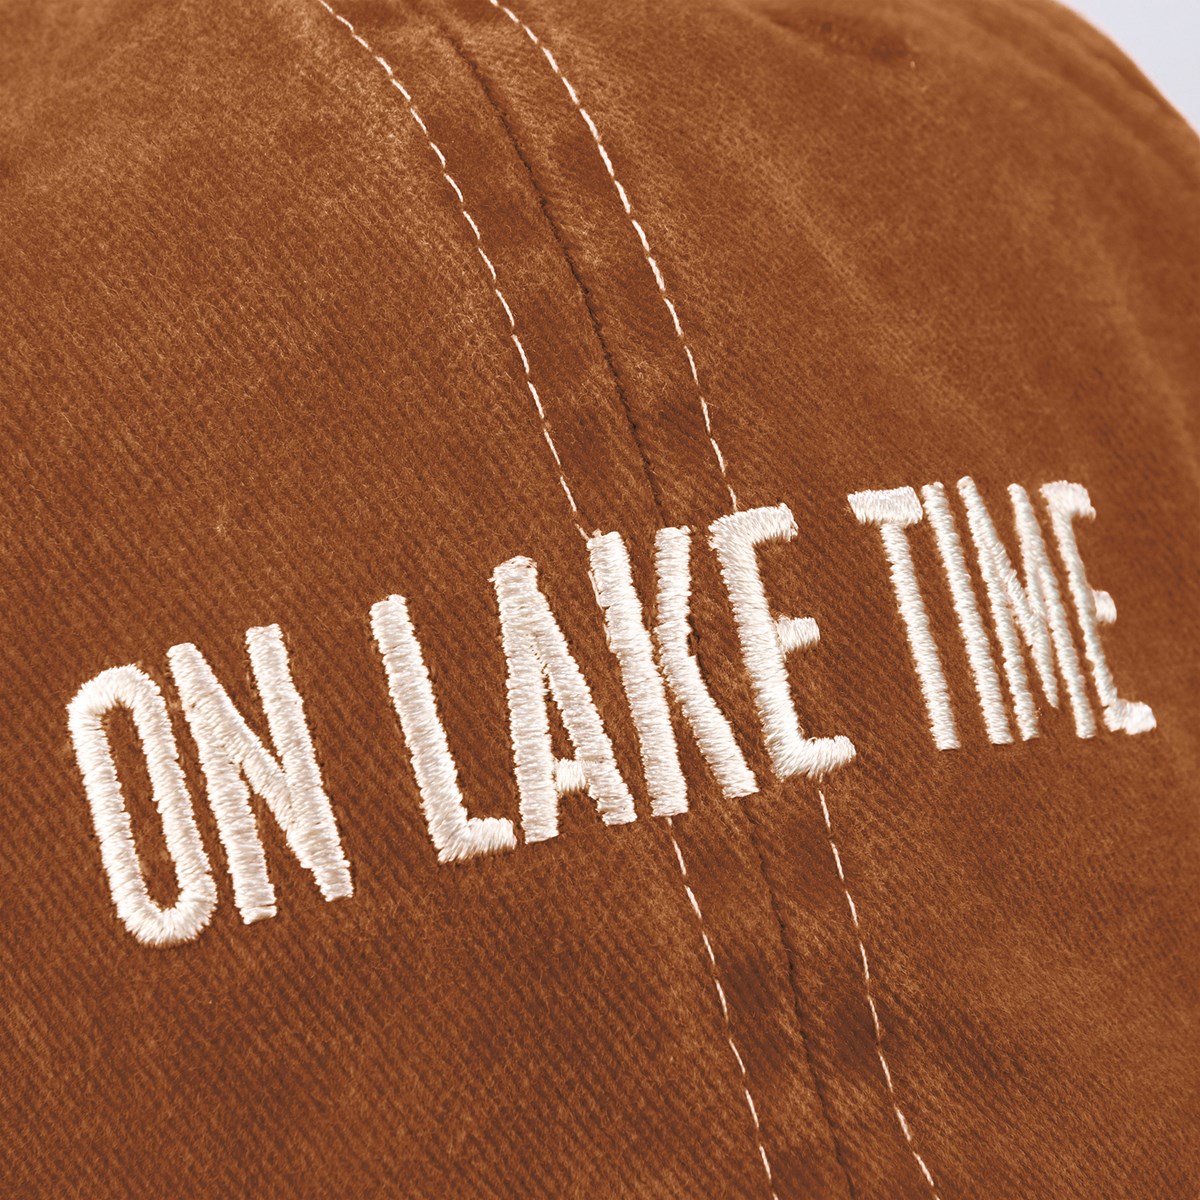 Baseball Cap - On Lake Time - One Size Fits Most - Cotton, Metal